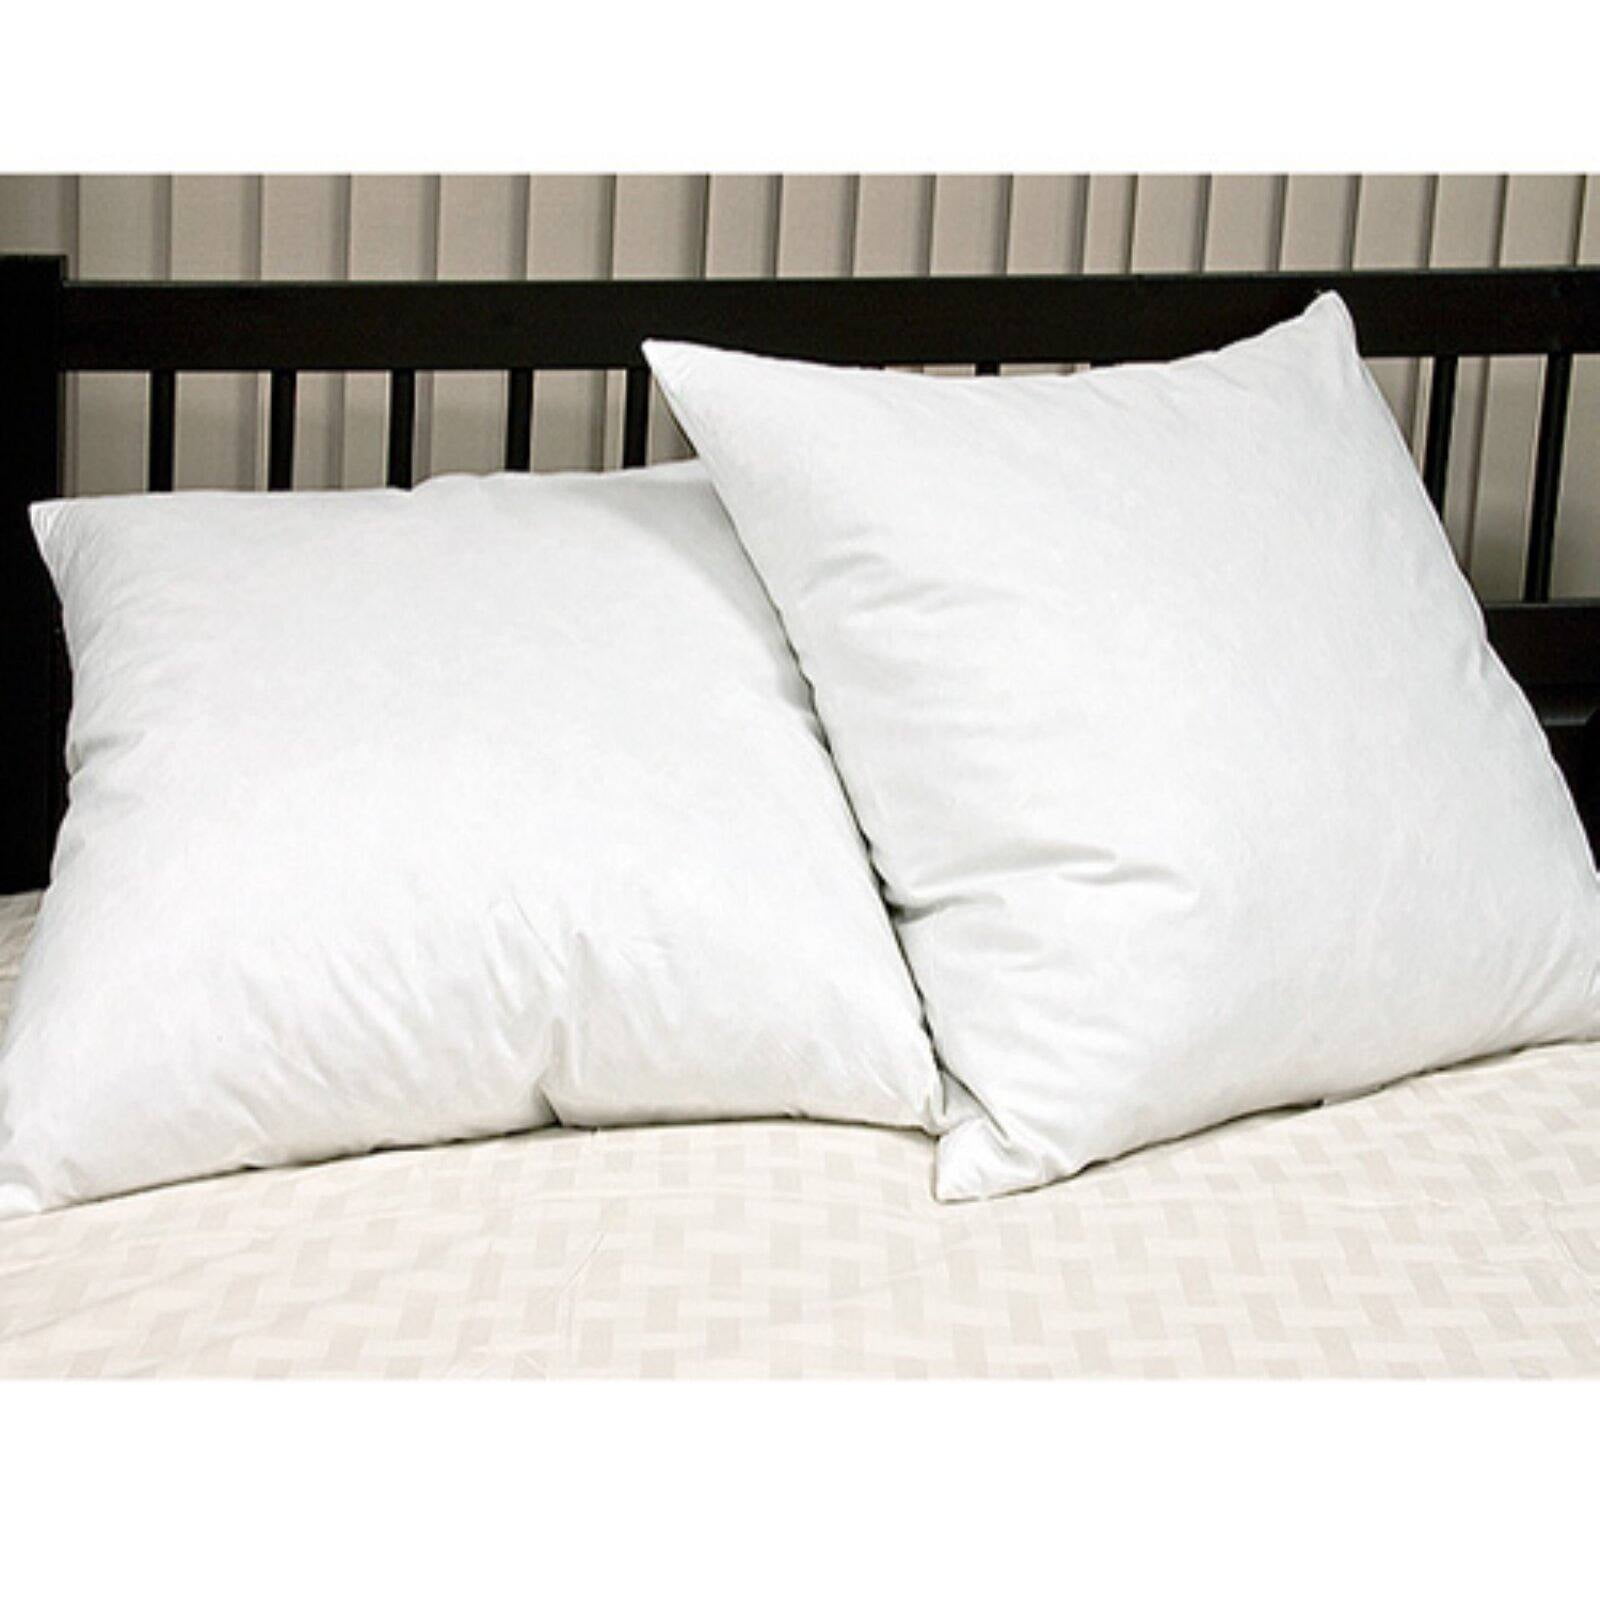 Downlite Hotel 230 TC 25/75 White Duck Down Feather Blend Hotel Pillow - Standard